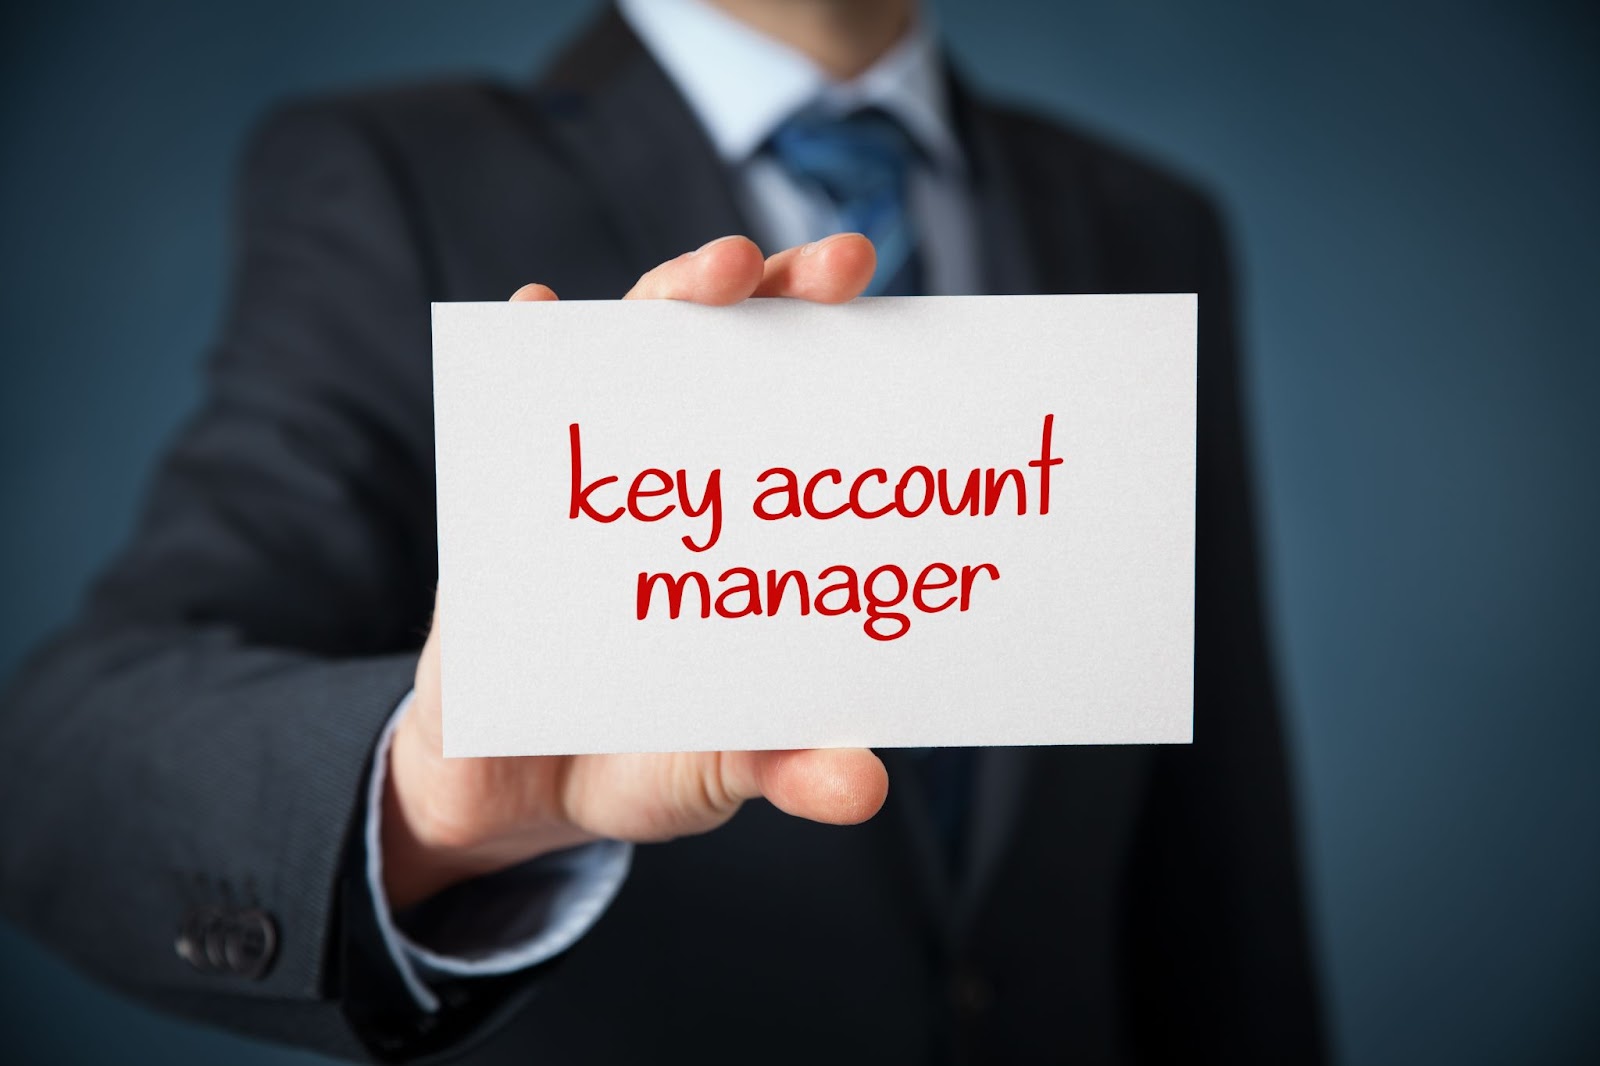 What are the responsibilities of an Account executive?